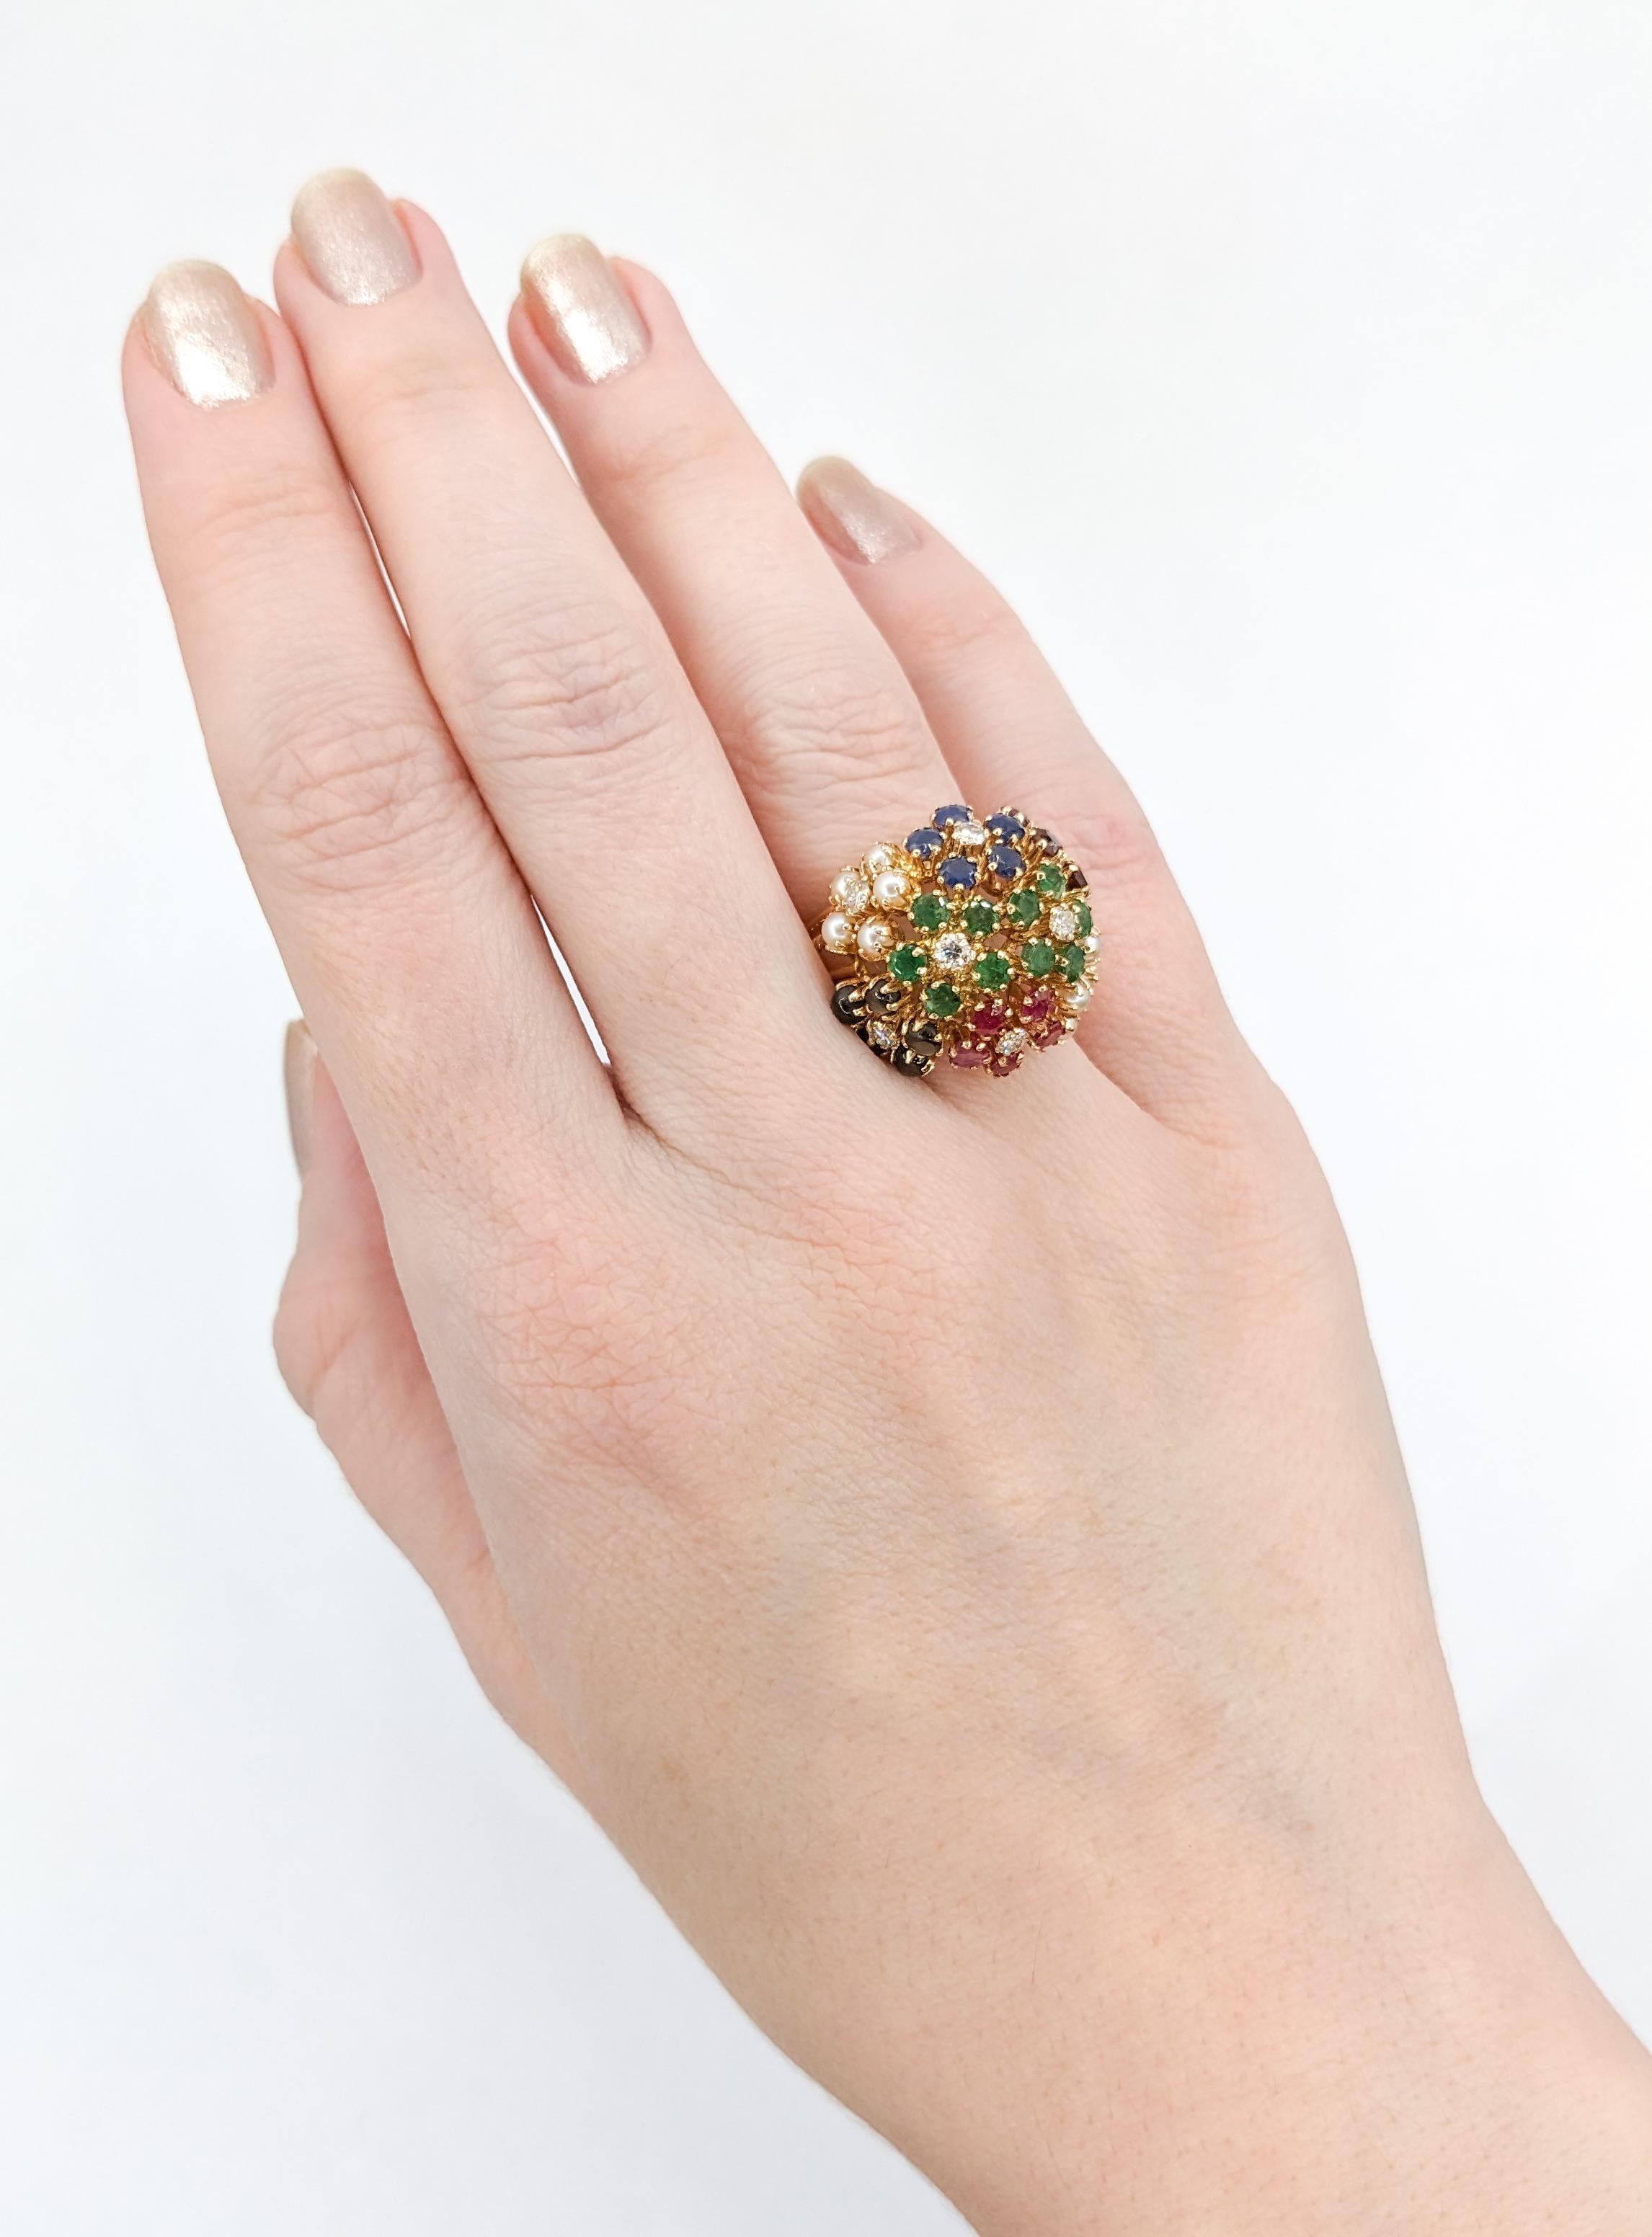 Whimsical Multi-stone Flower Cluster Ring with Diamonds, Rubies, Pearls & Emeralds in 14K Gold

Immerse yourself in the allure of this vintage floral multi-gem cluster ring. Expertly crafted in the radiant warmth of 14k Yellow Gold, this masterpiece